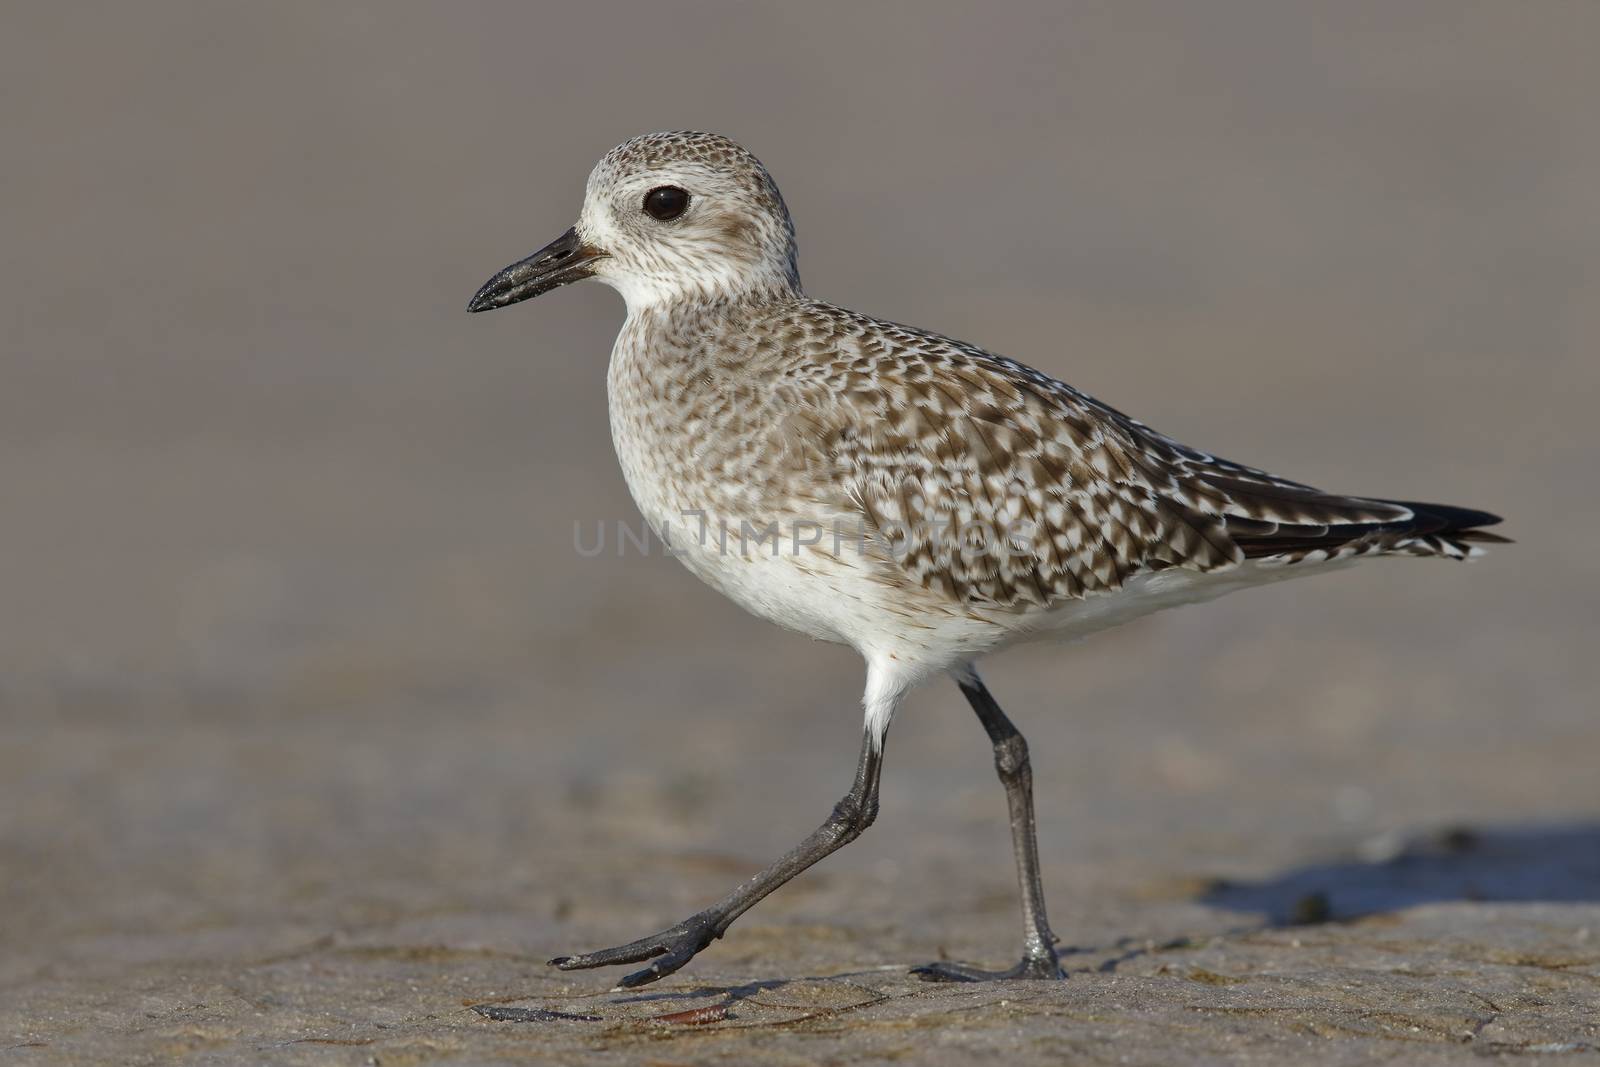 Black-bellied Plover foraging on a Florida beach by gonepaddling